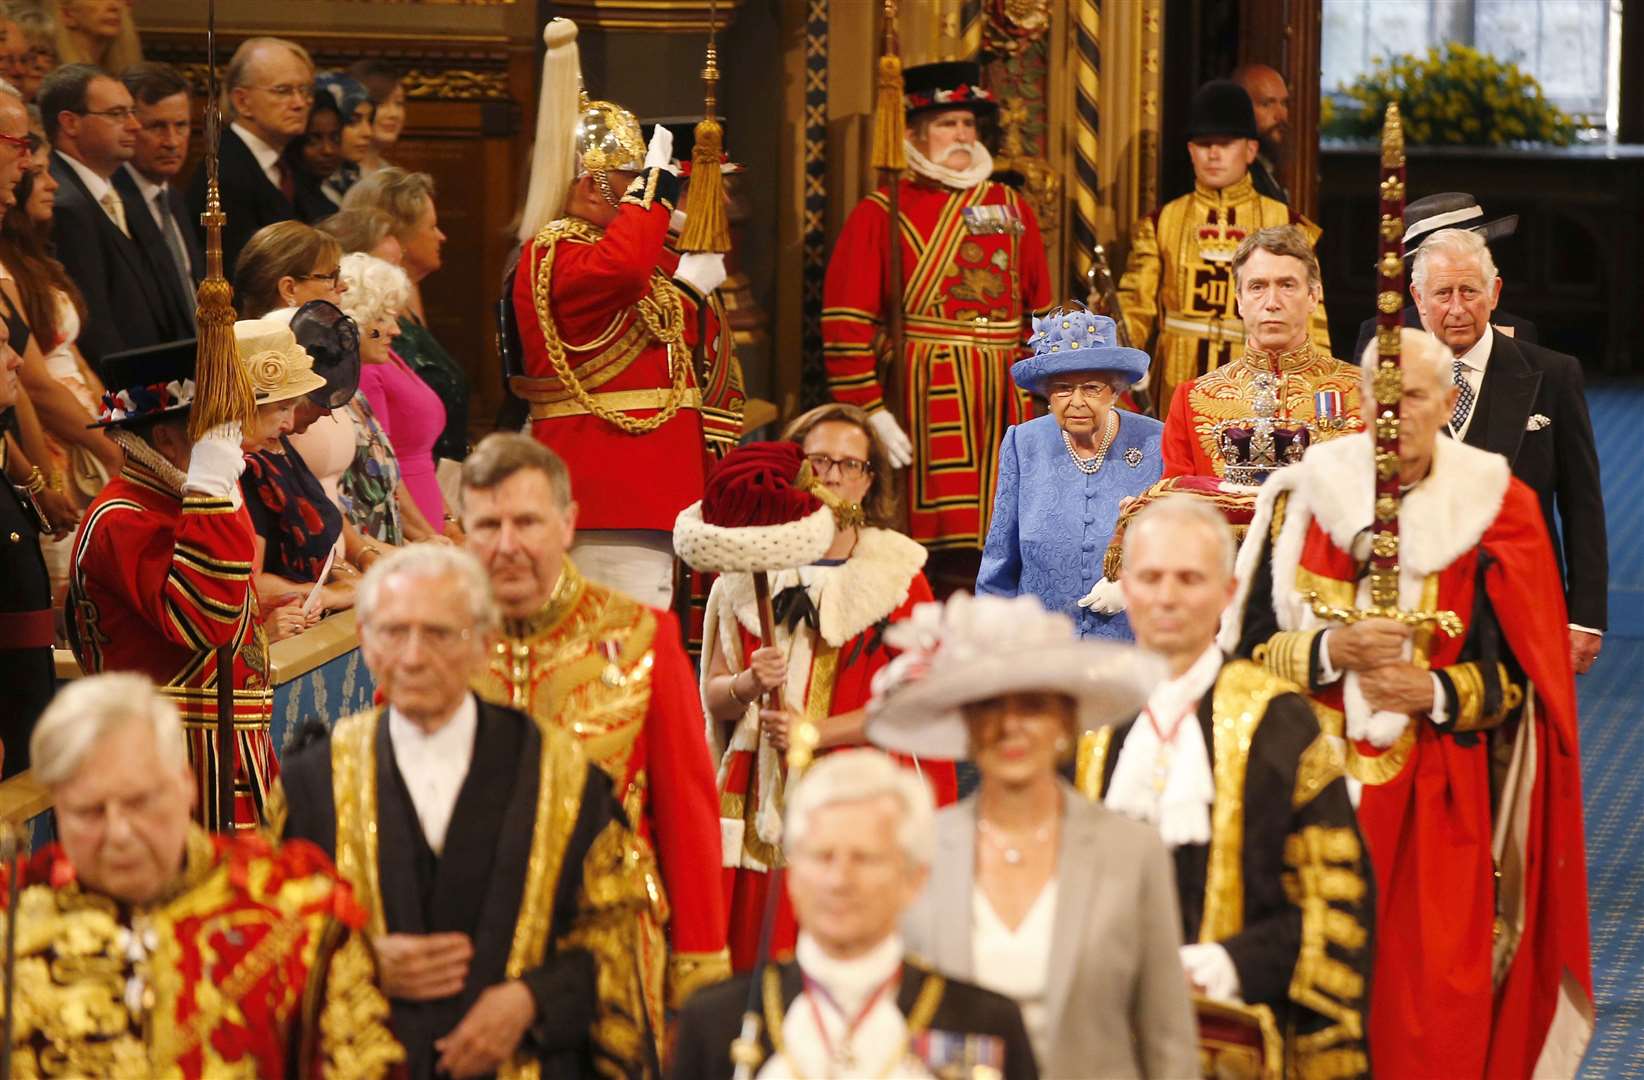 The Earl Marshal among the Royal Procession during the State Opening of Parliament in 2017 (Alastair Grant/PA)